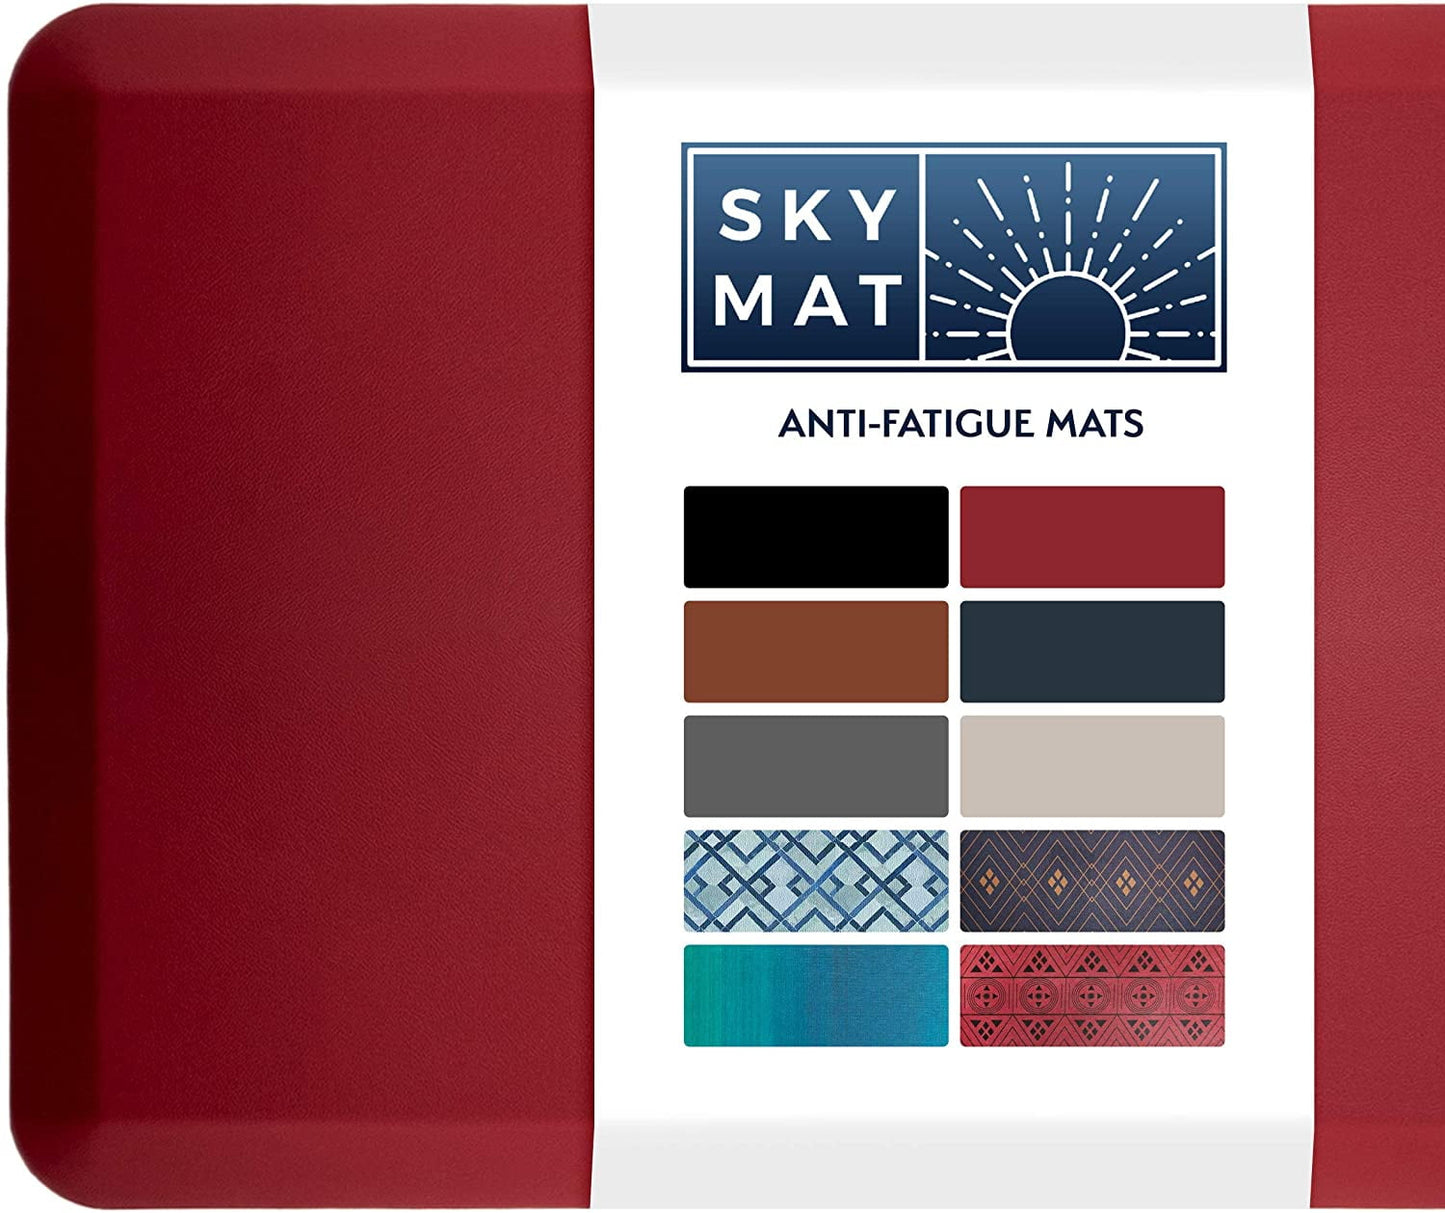 Sky Solutions Anti Fatigue Mat - Cushioned 3/4 Inch Comfort Floor Mats for Kitchen, Office & Garage (20 in x 32 in - Burgundy)